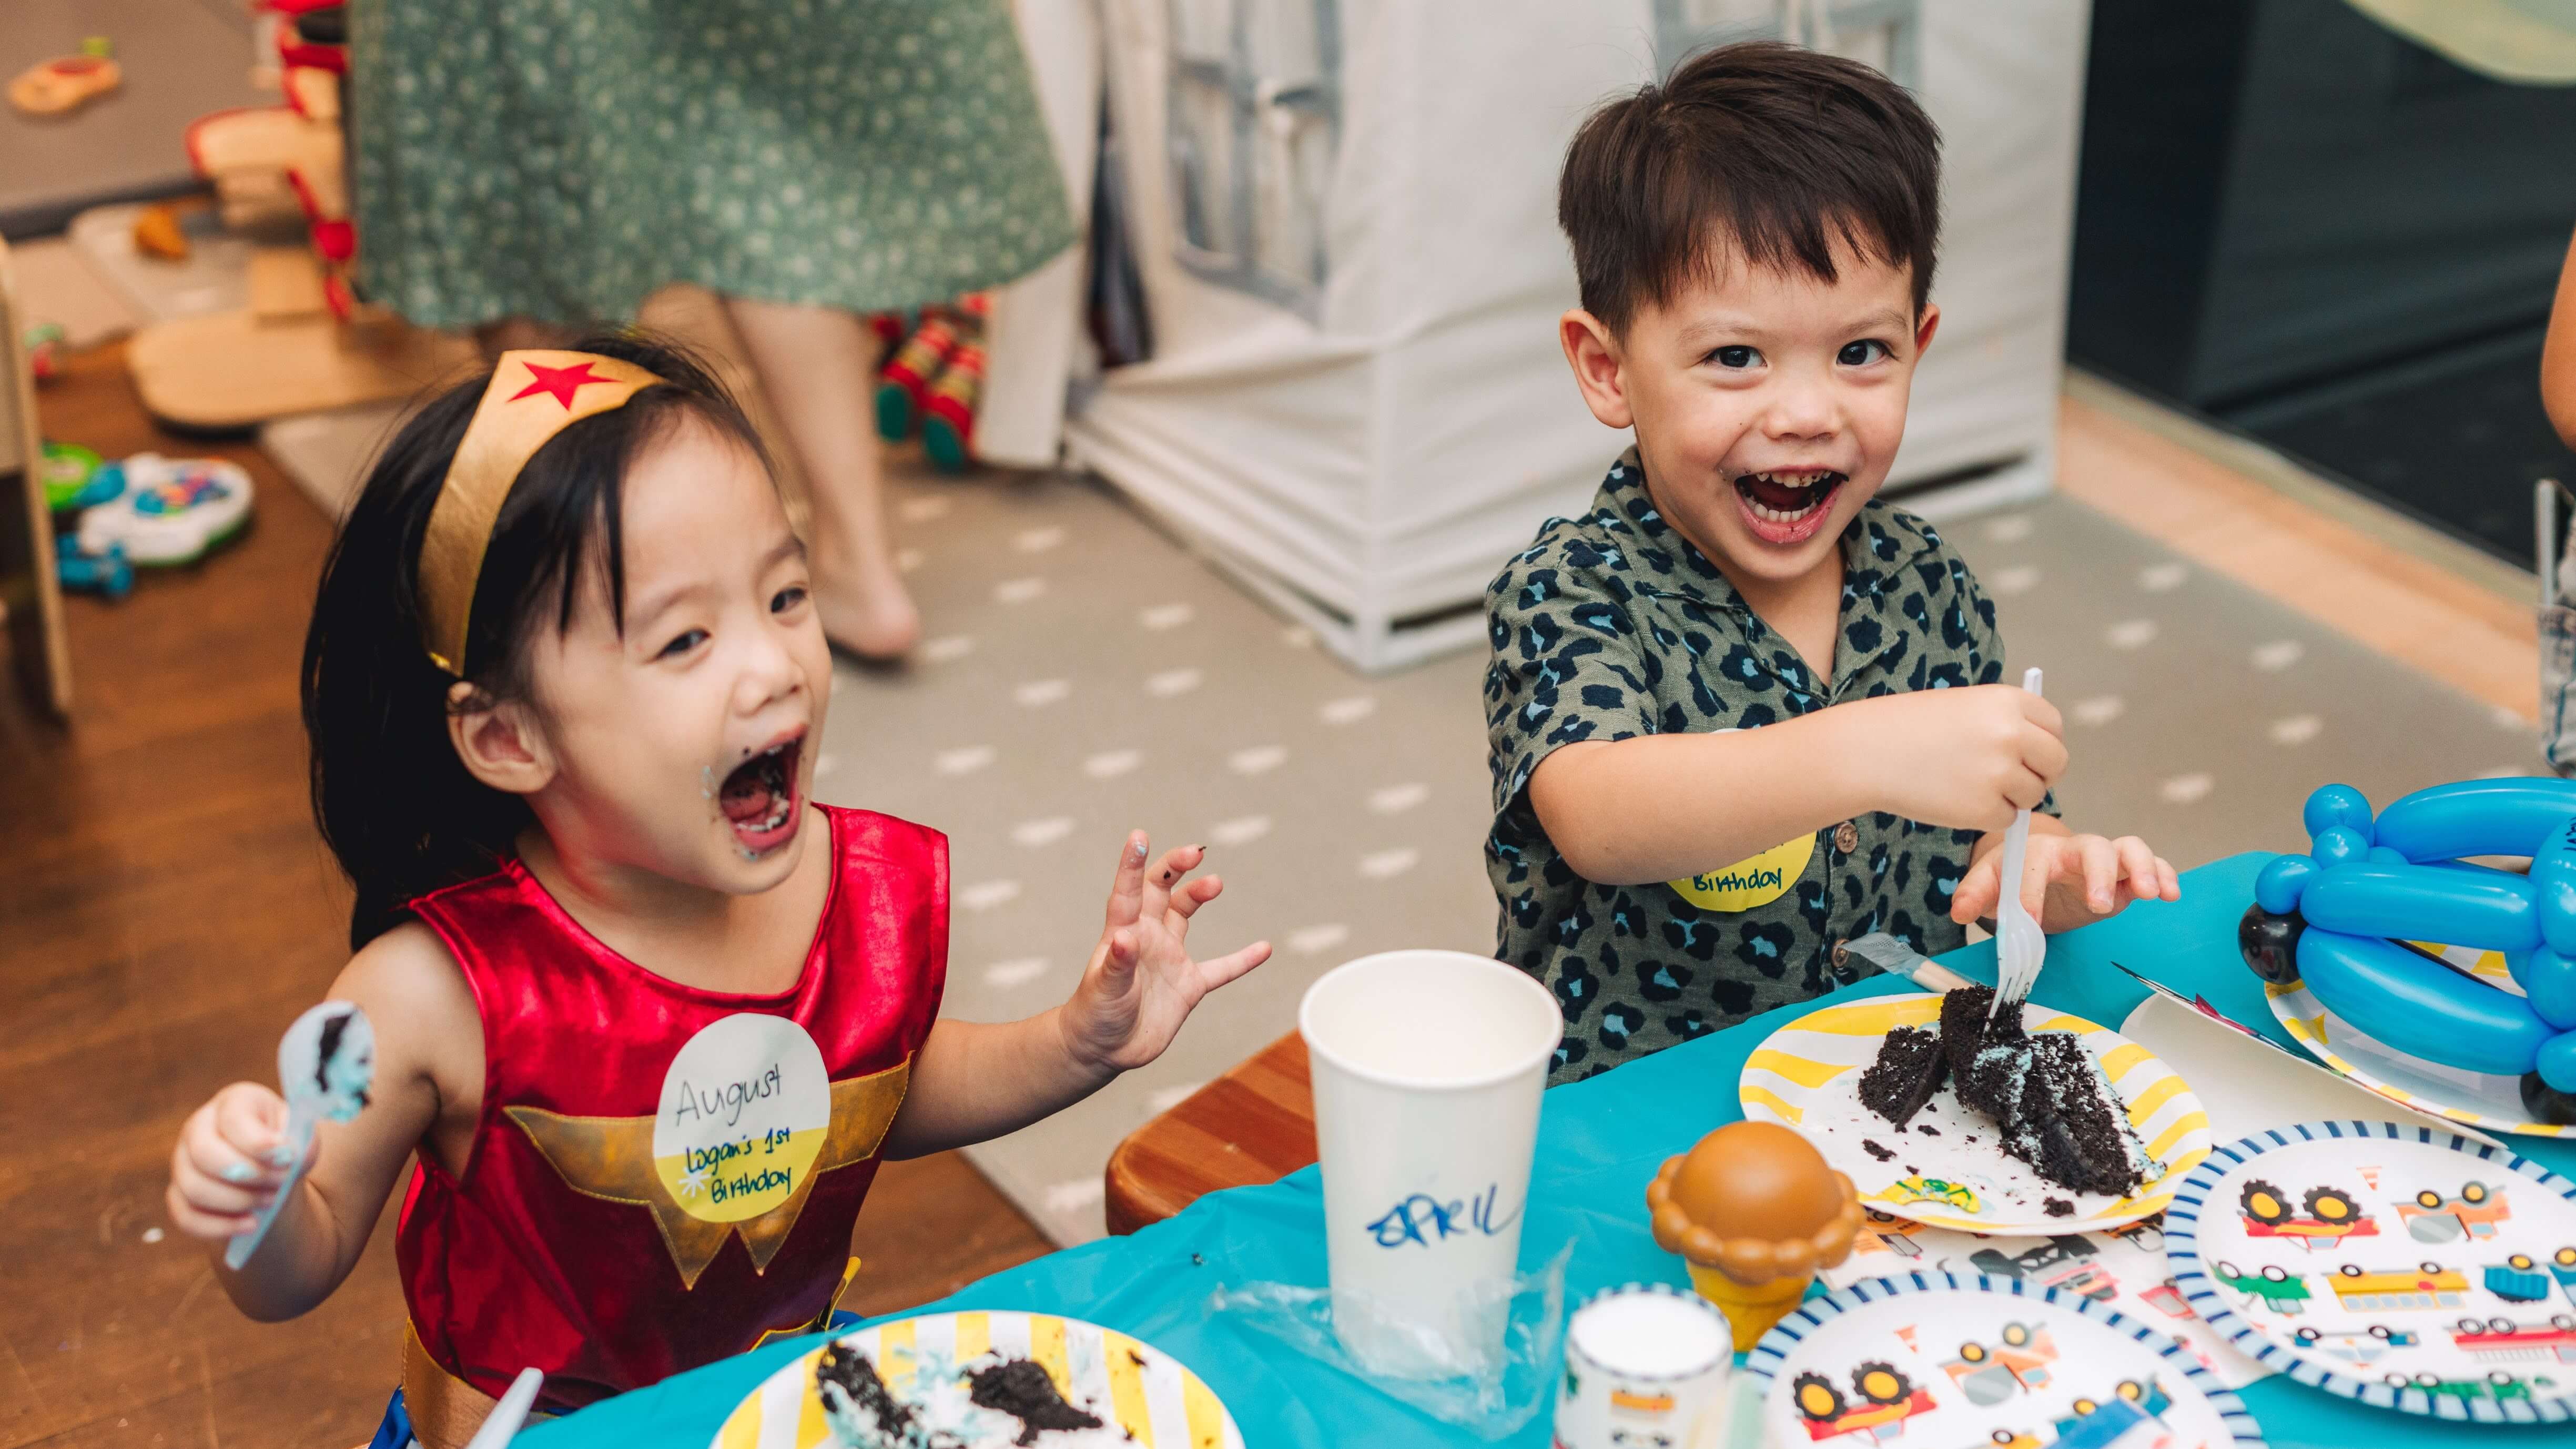 Two toddlers at a birthday party eating cake